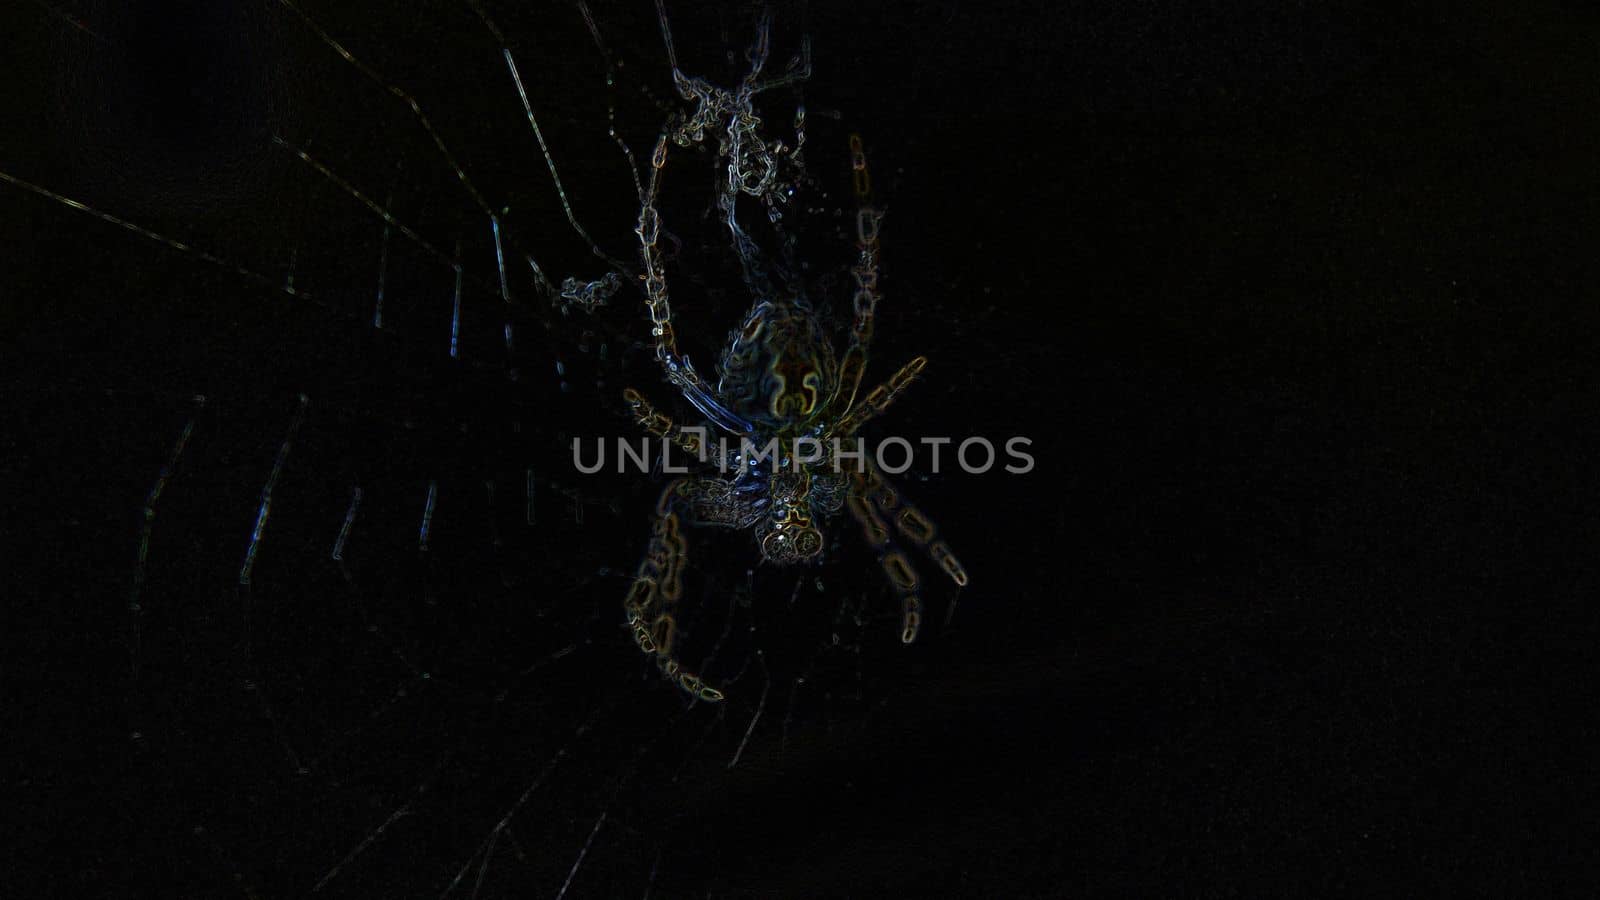 Creepy abstract silhouette of a spider hanging on a web on a dark background by Mastak80